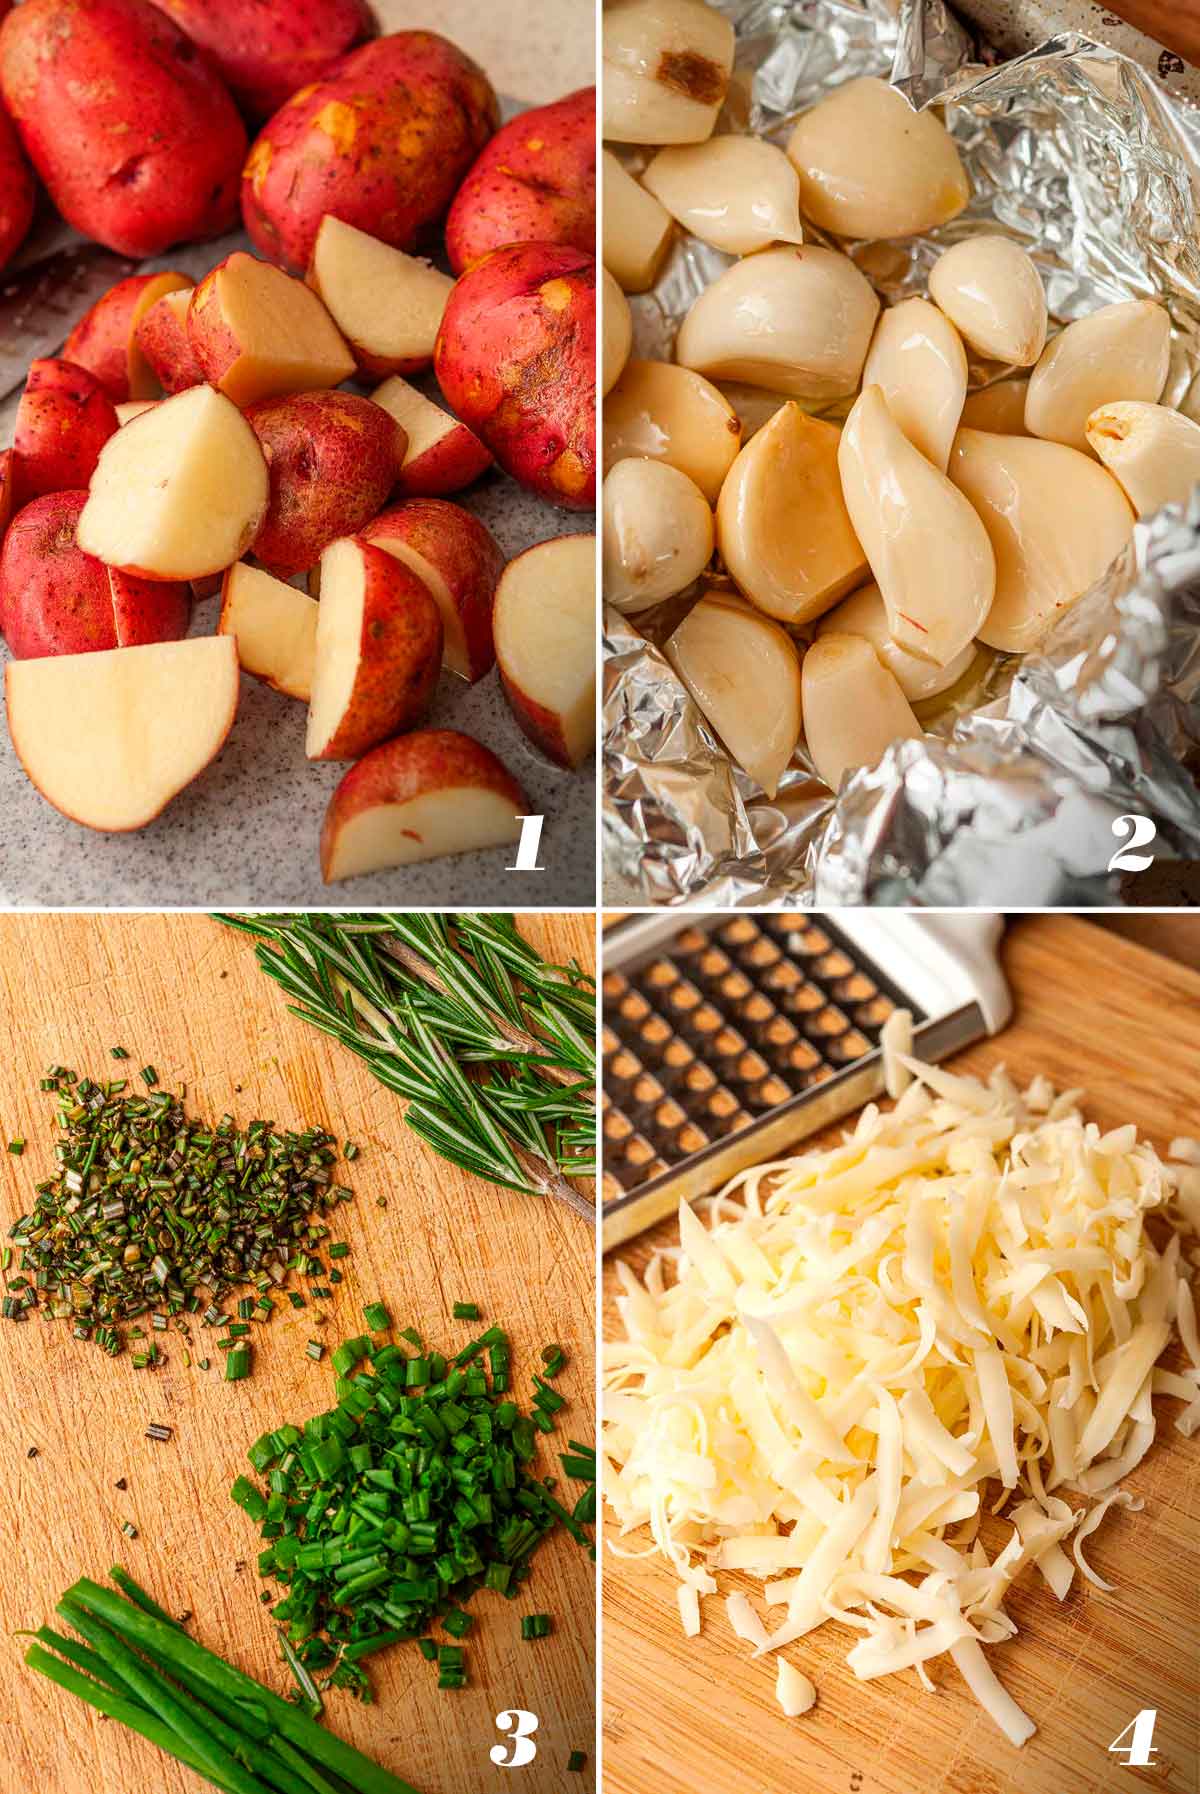 A collage of 4 numbered images showing how to prep mashed potatoes.